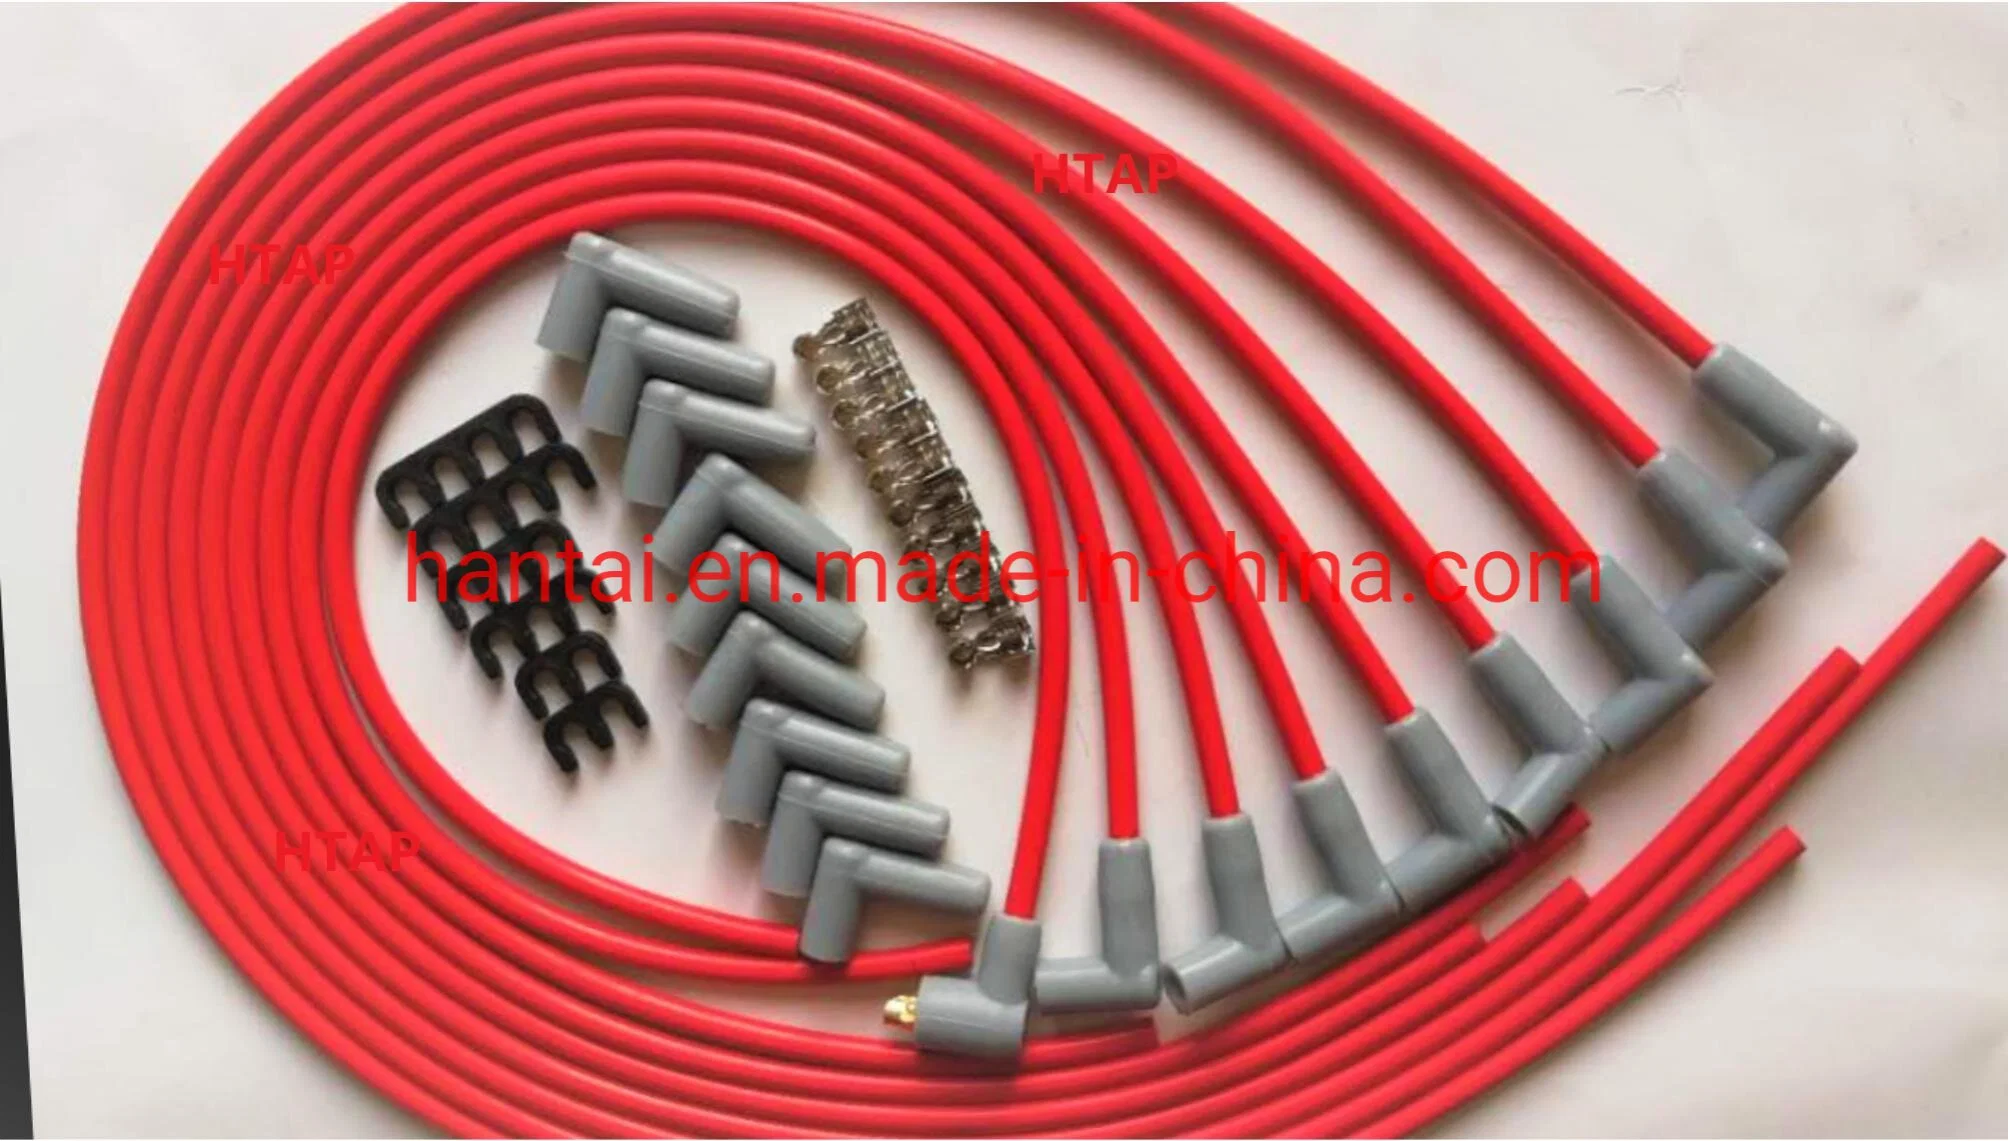 Spark Plug Wire, Ignition Cable, Ignition Wire Set, Auto Parts for Lada Car